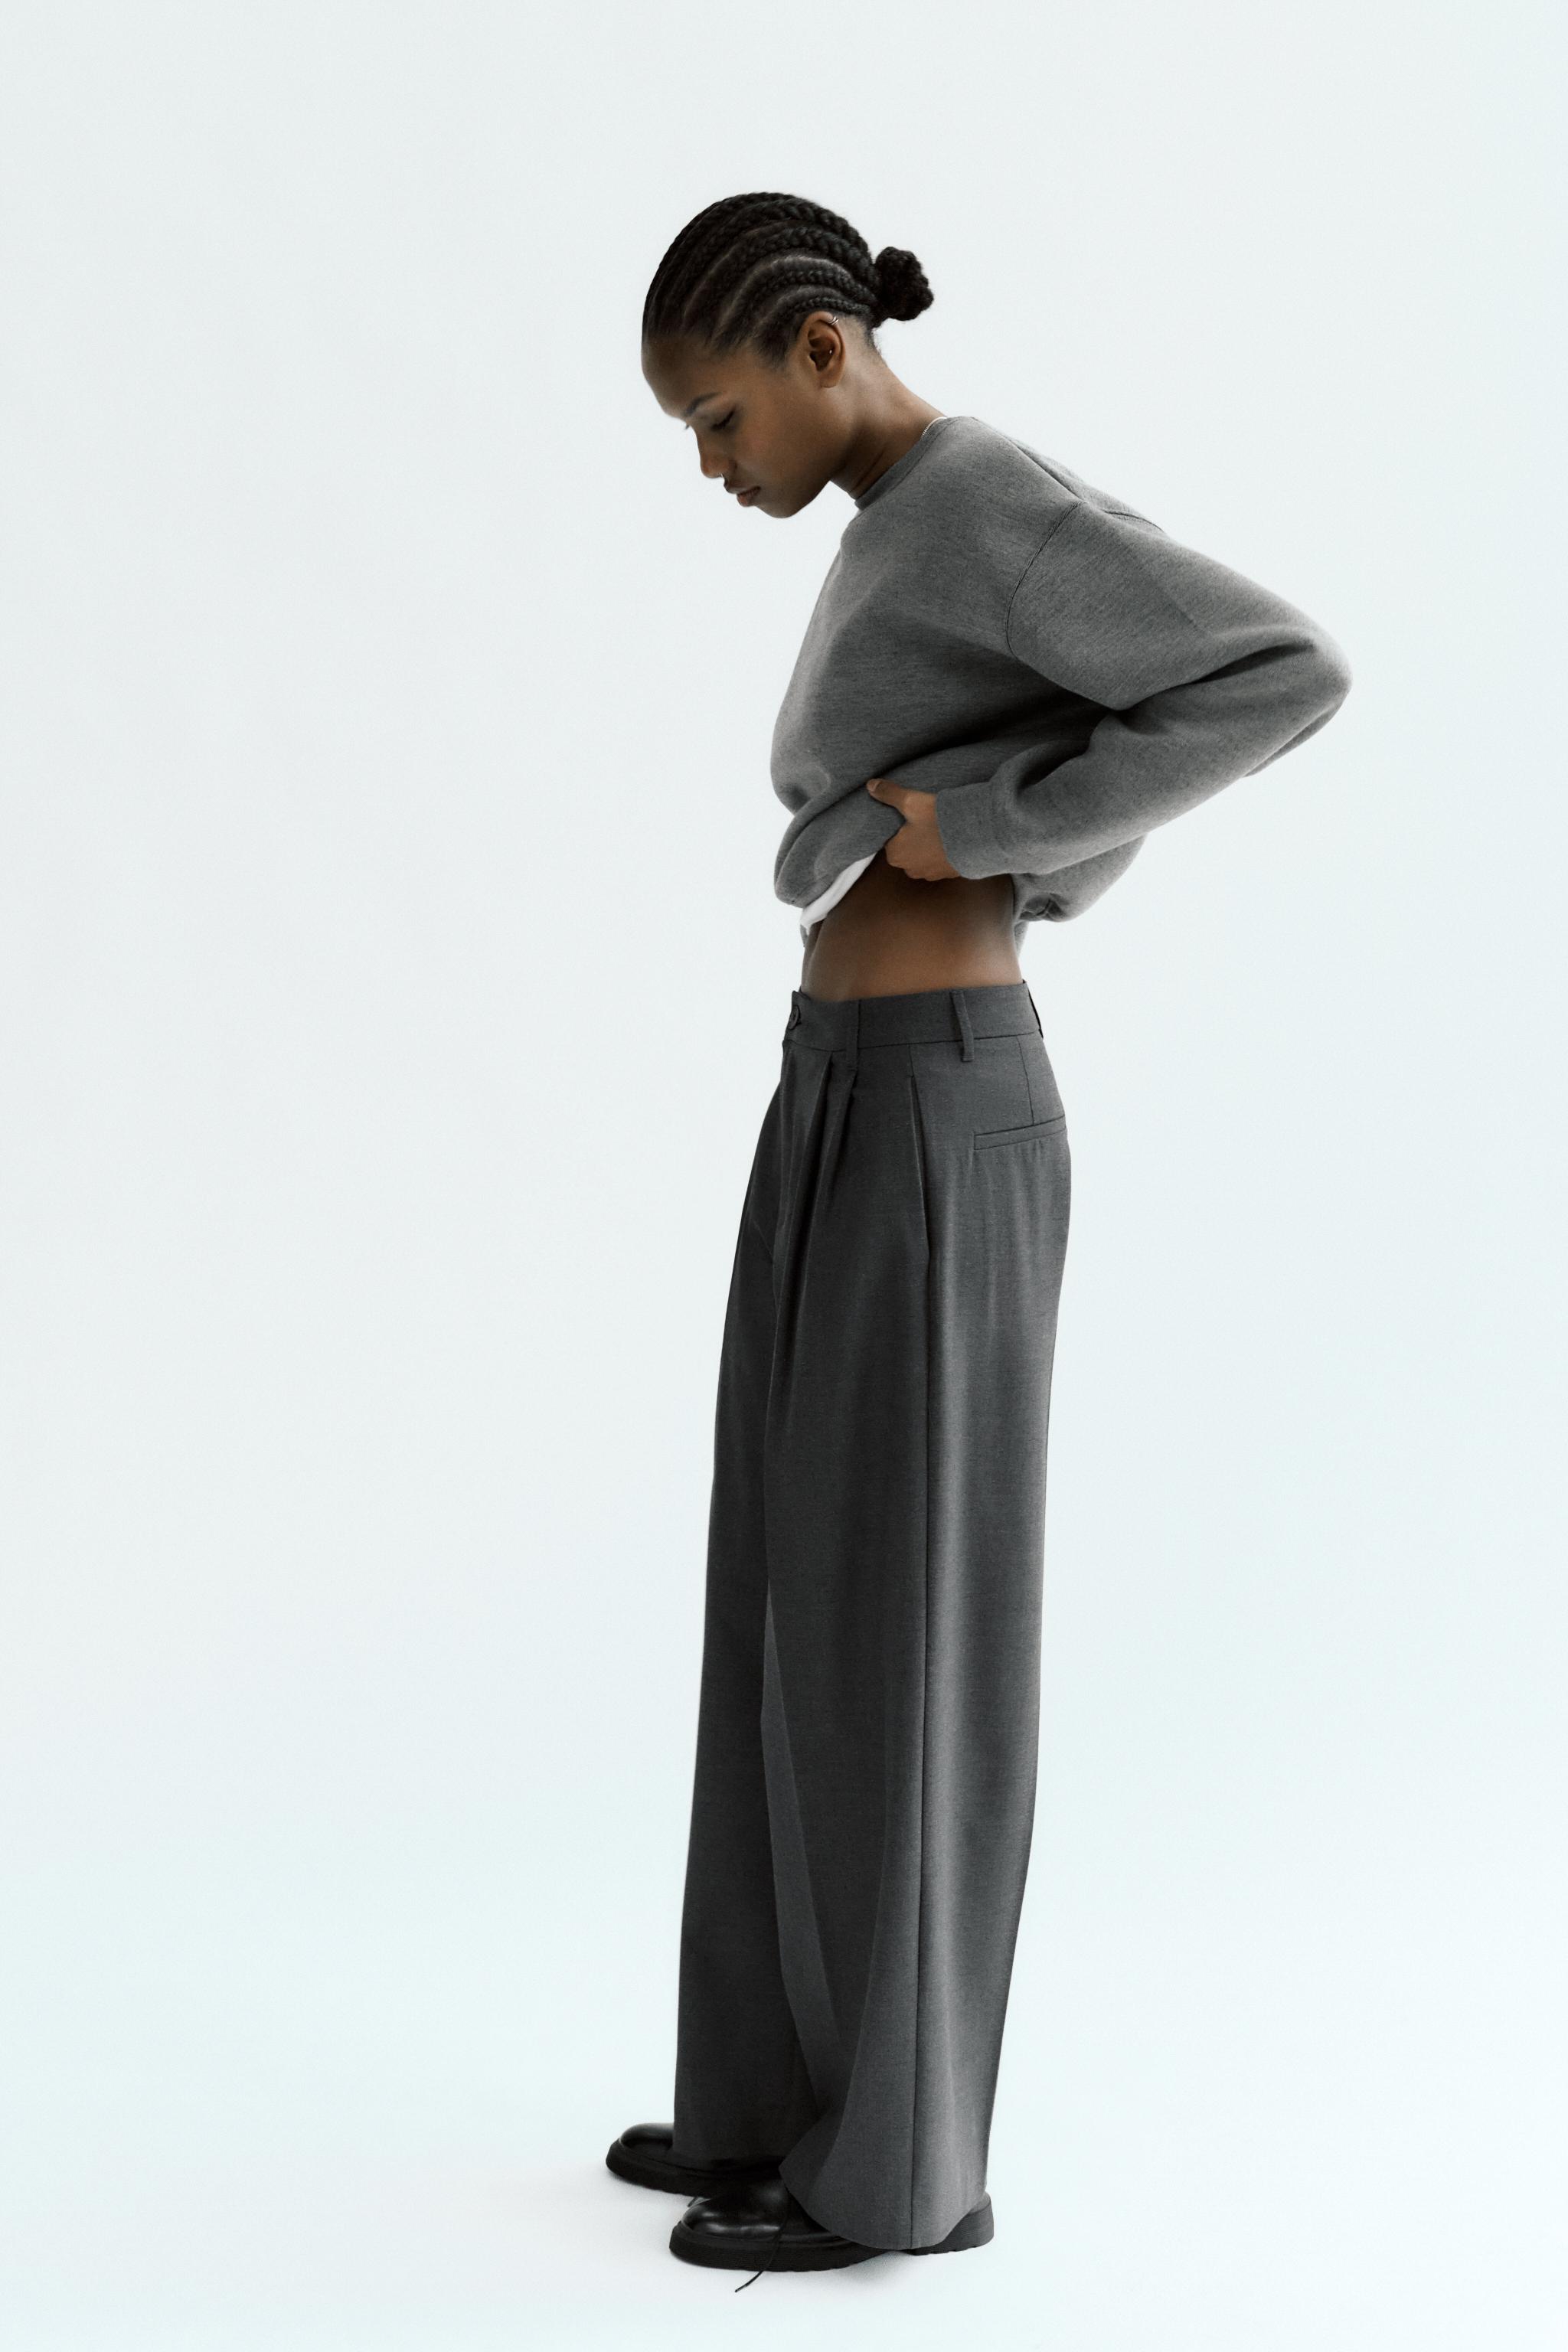 Try XS PLEATED PANTS WITH BUTTONS from Zara